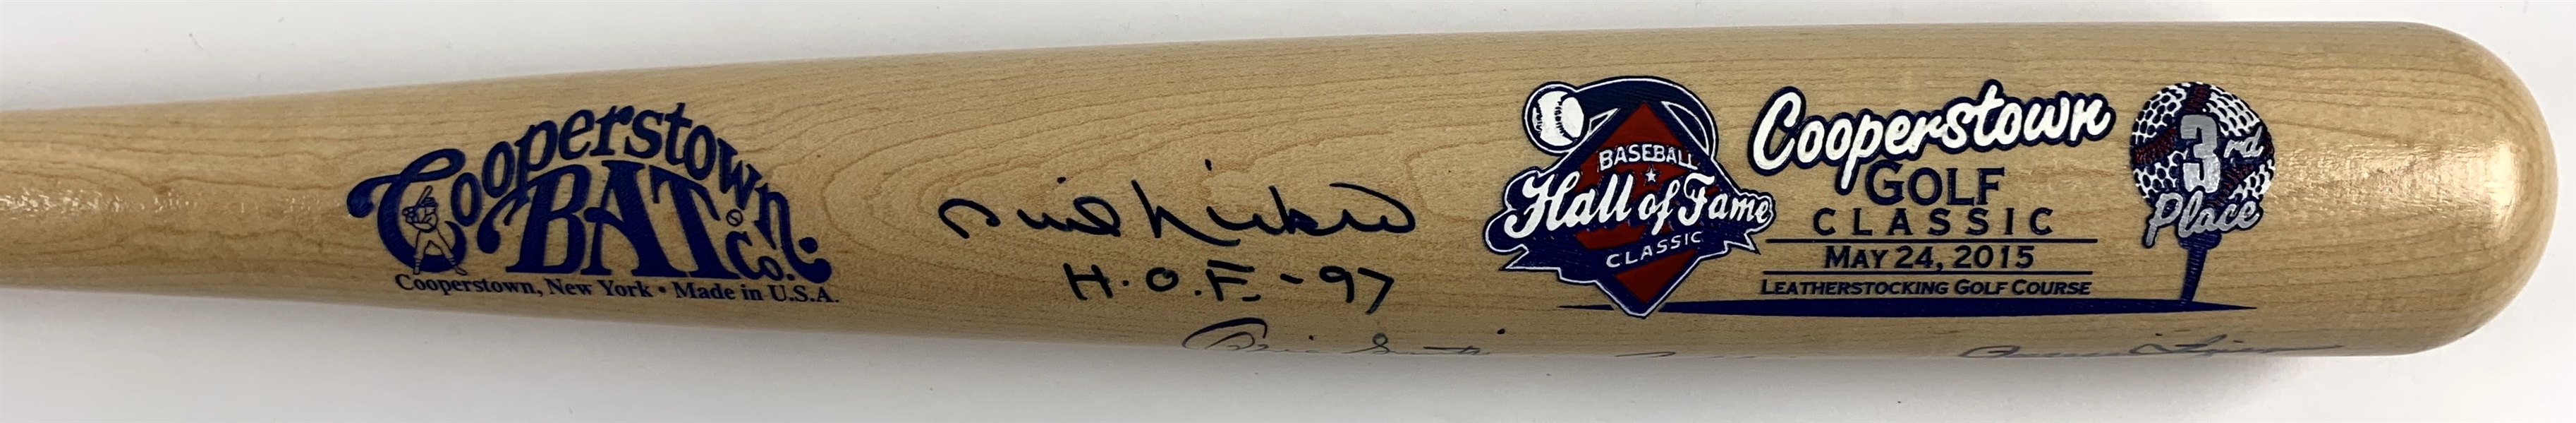 Baseball HOFers Signed Cooperstown Classic Special Edition Bat w/Smith, Glavine, Yount, etc. (Beckett/BAS Guaranteed)